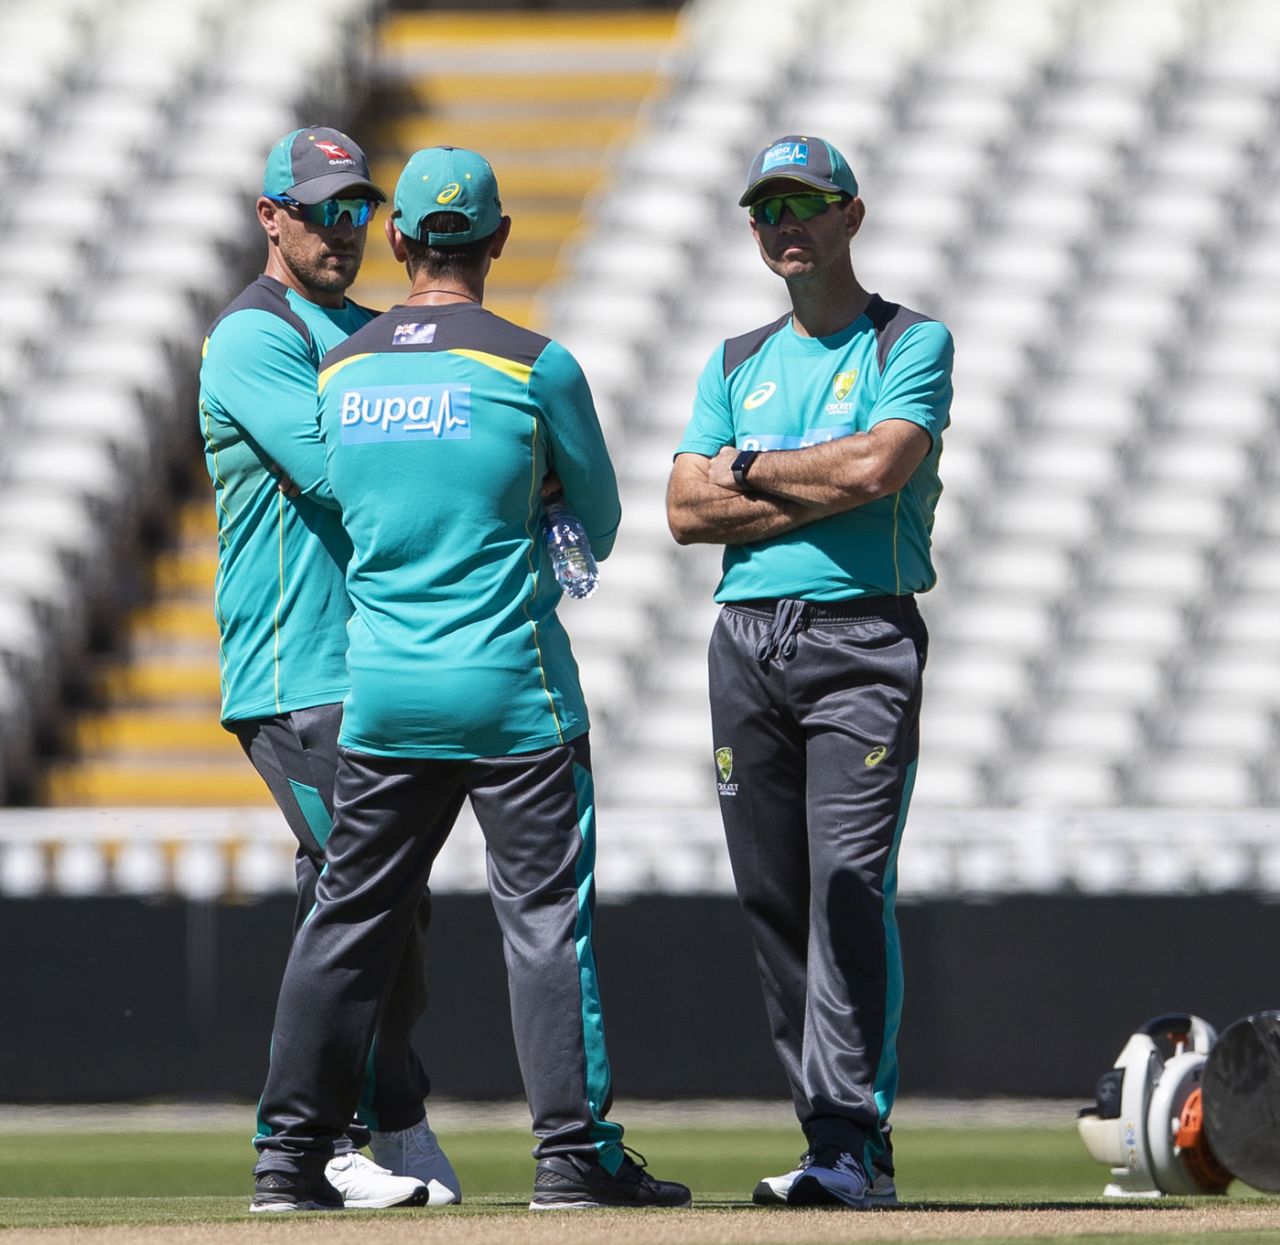 Aaron Finch, Justin Langer and Ricky Ponting chat at training, Edgbaston, June 26, 2018